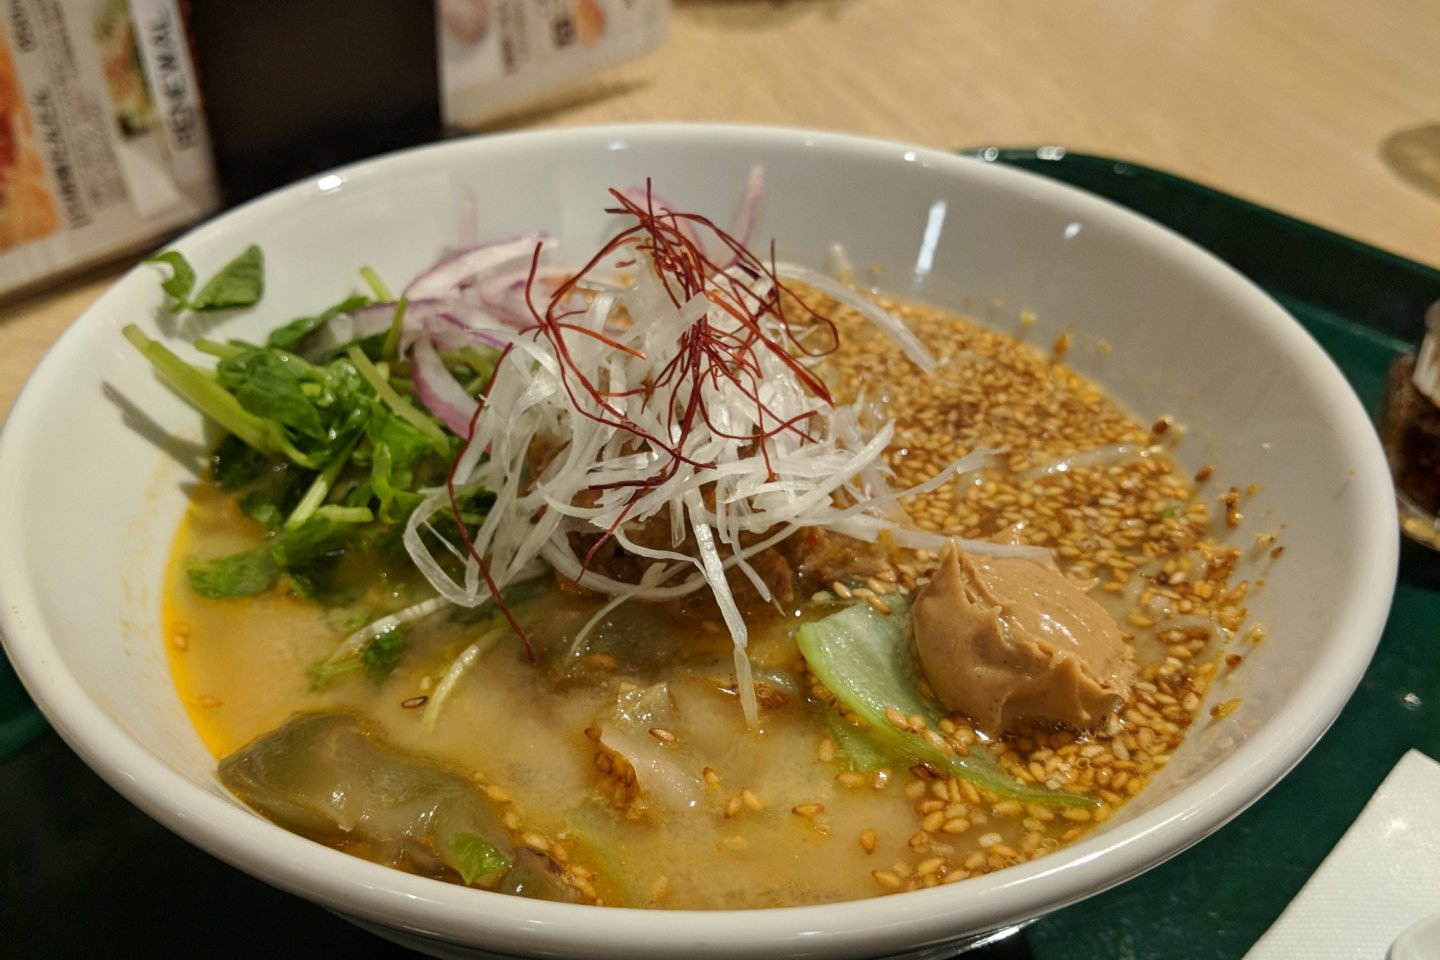 The tantan noodles are the signature dish here